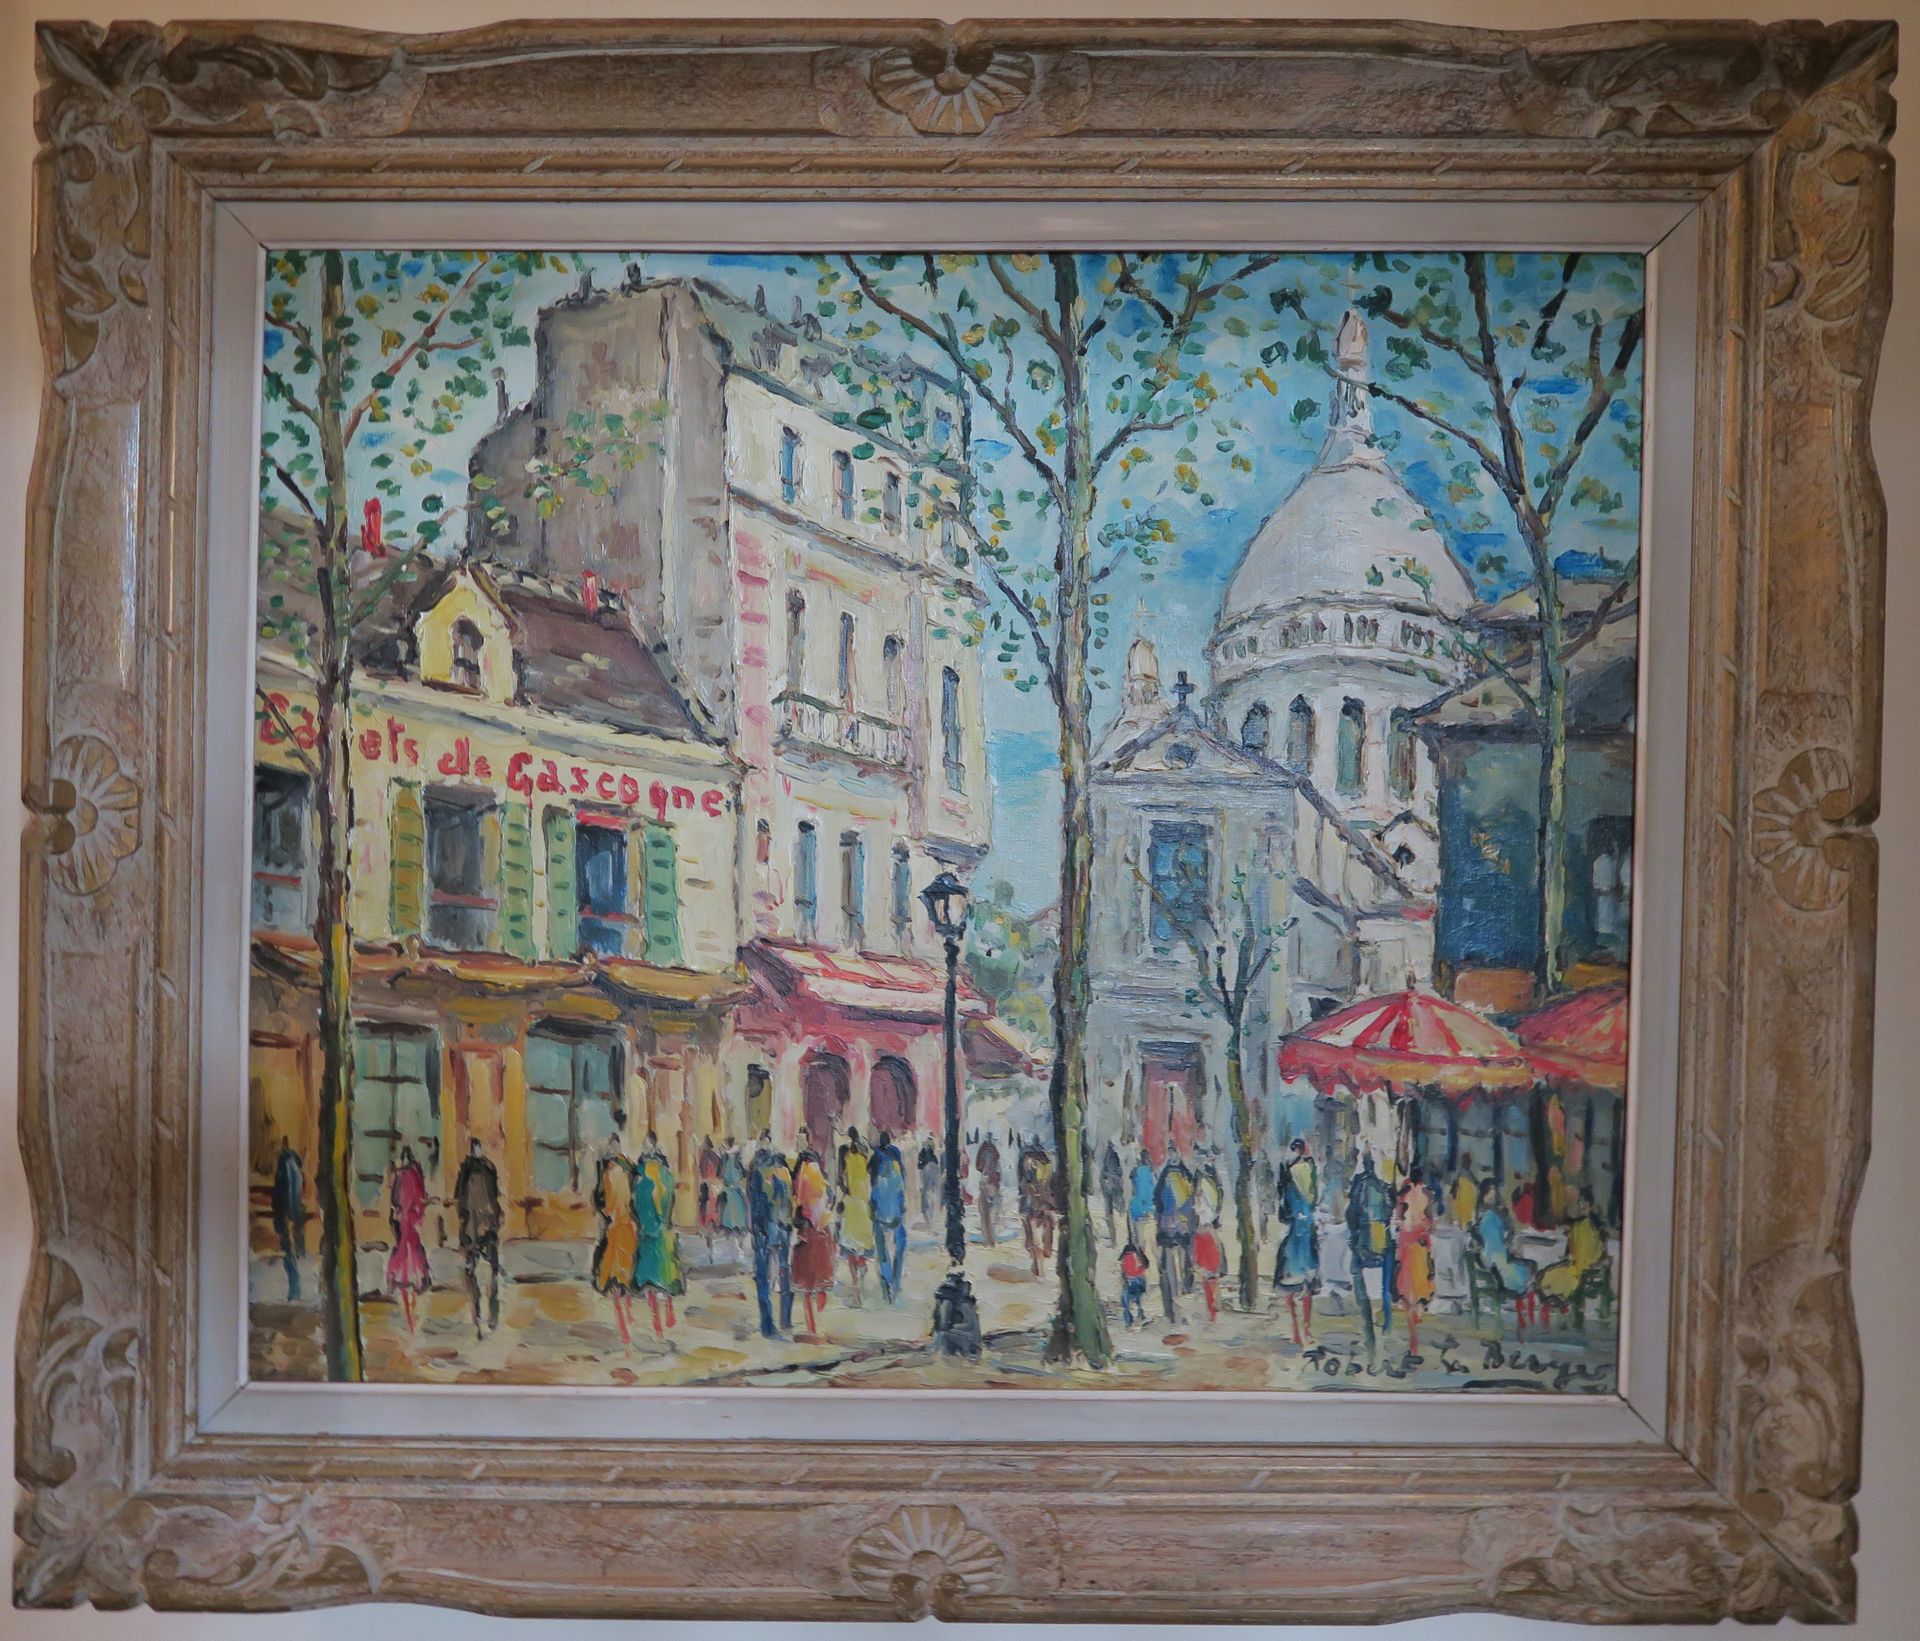 Null Robert LE BERGER (1905-1972) 

"Montmartre, 1° giorno d'estate in Place du &hellip;